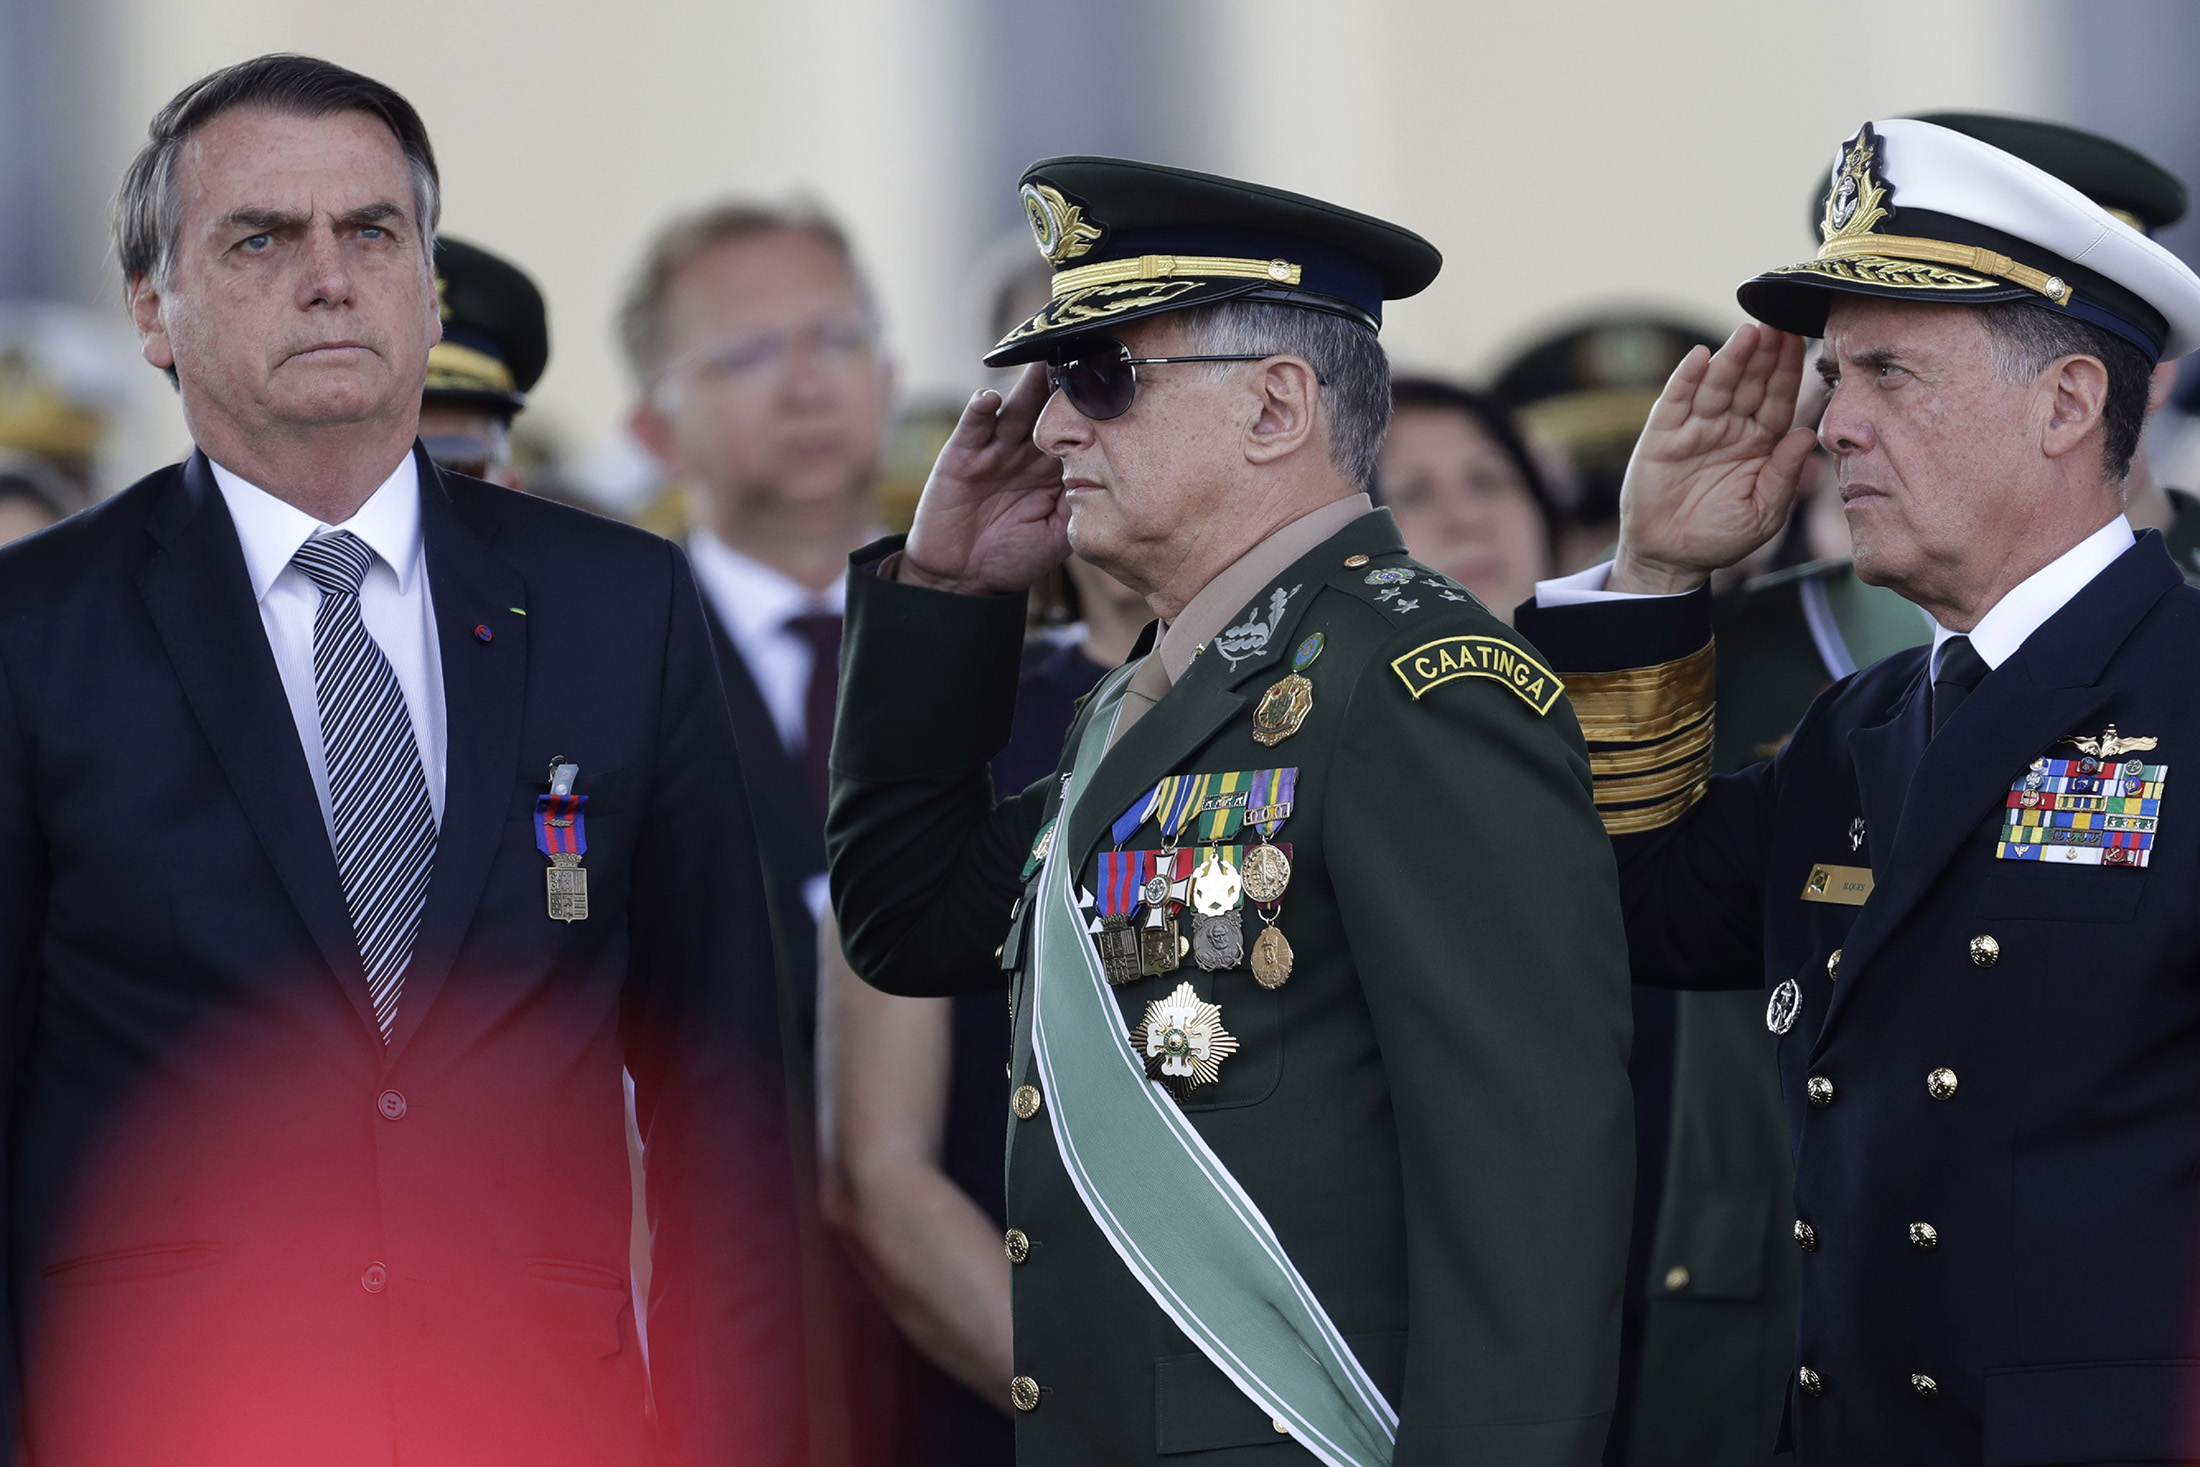 Brazil’s President Jair Bolsonaro, left, receives military honors during a ceremony for the Day of the Soldier&nbsp;at the Army Headquarters in Brasilia in August 2019.